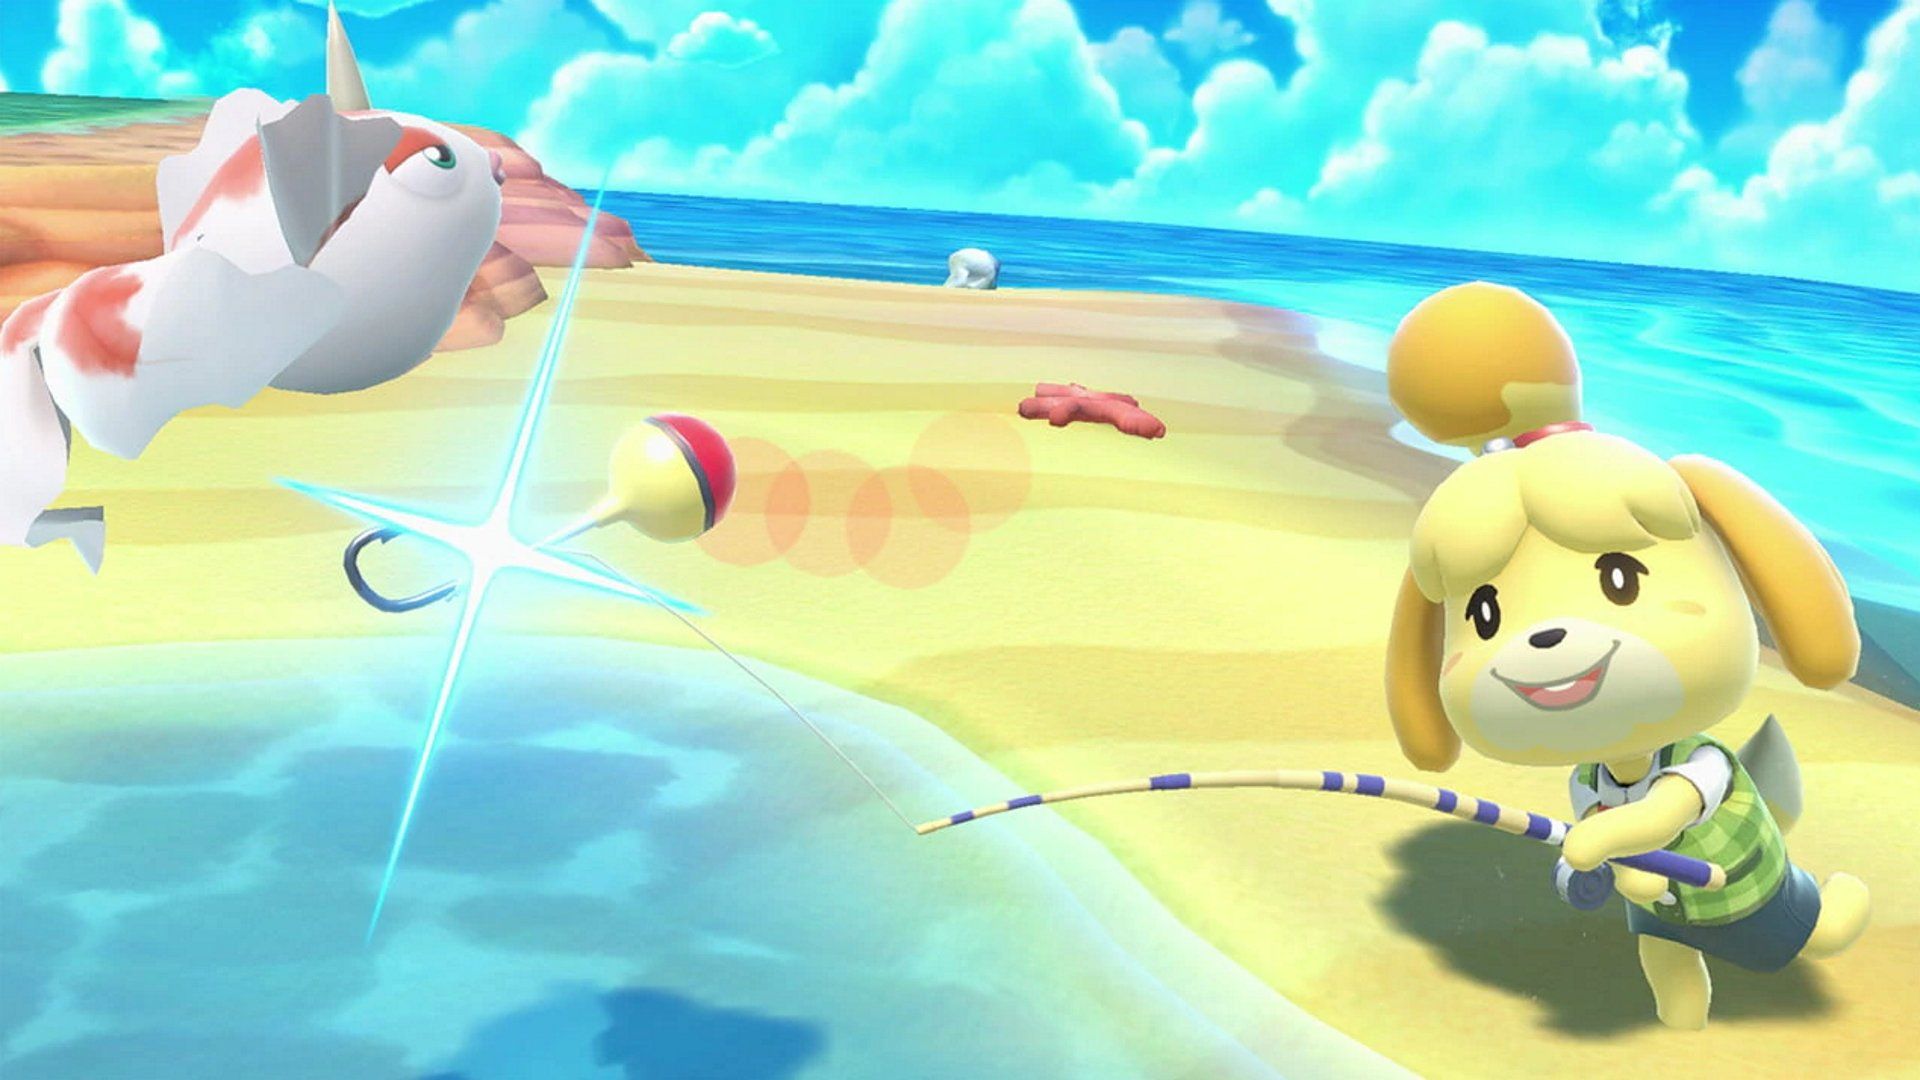 Is Isabelle in Animal Crossing: New Horizons?